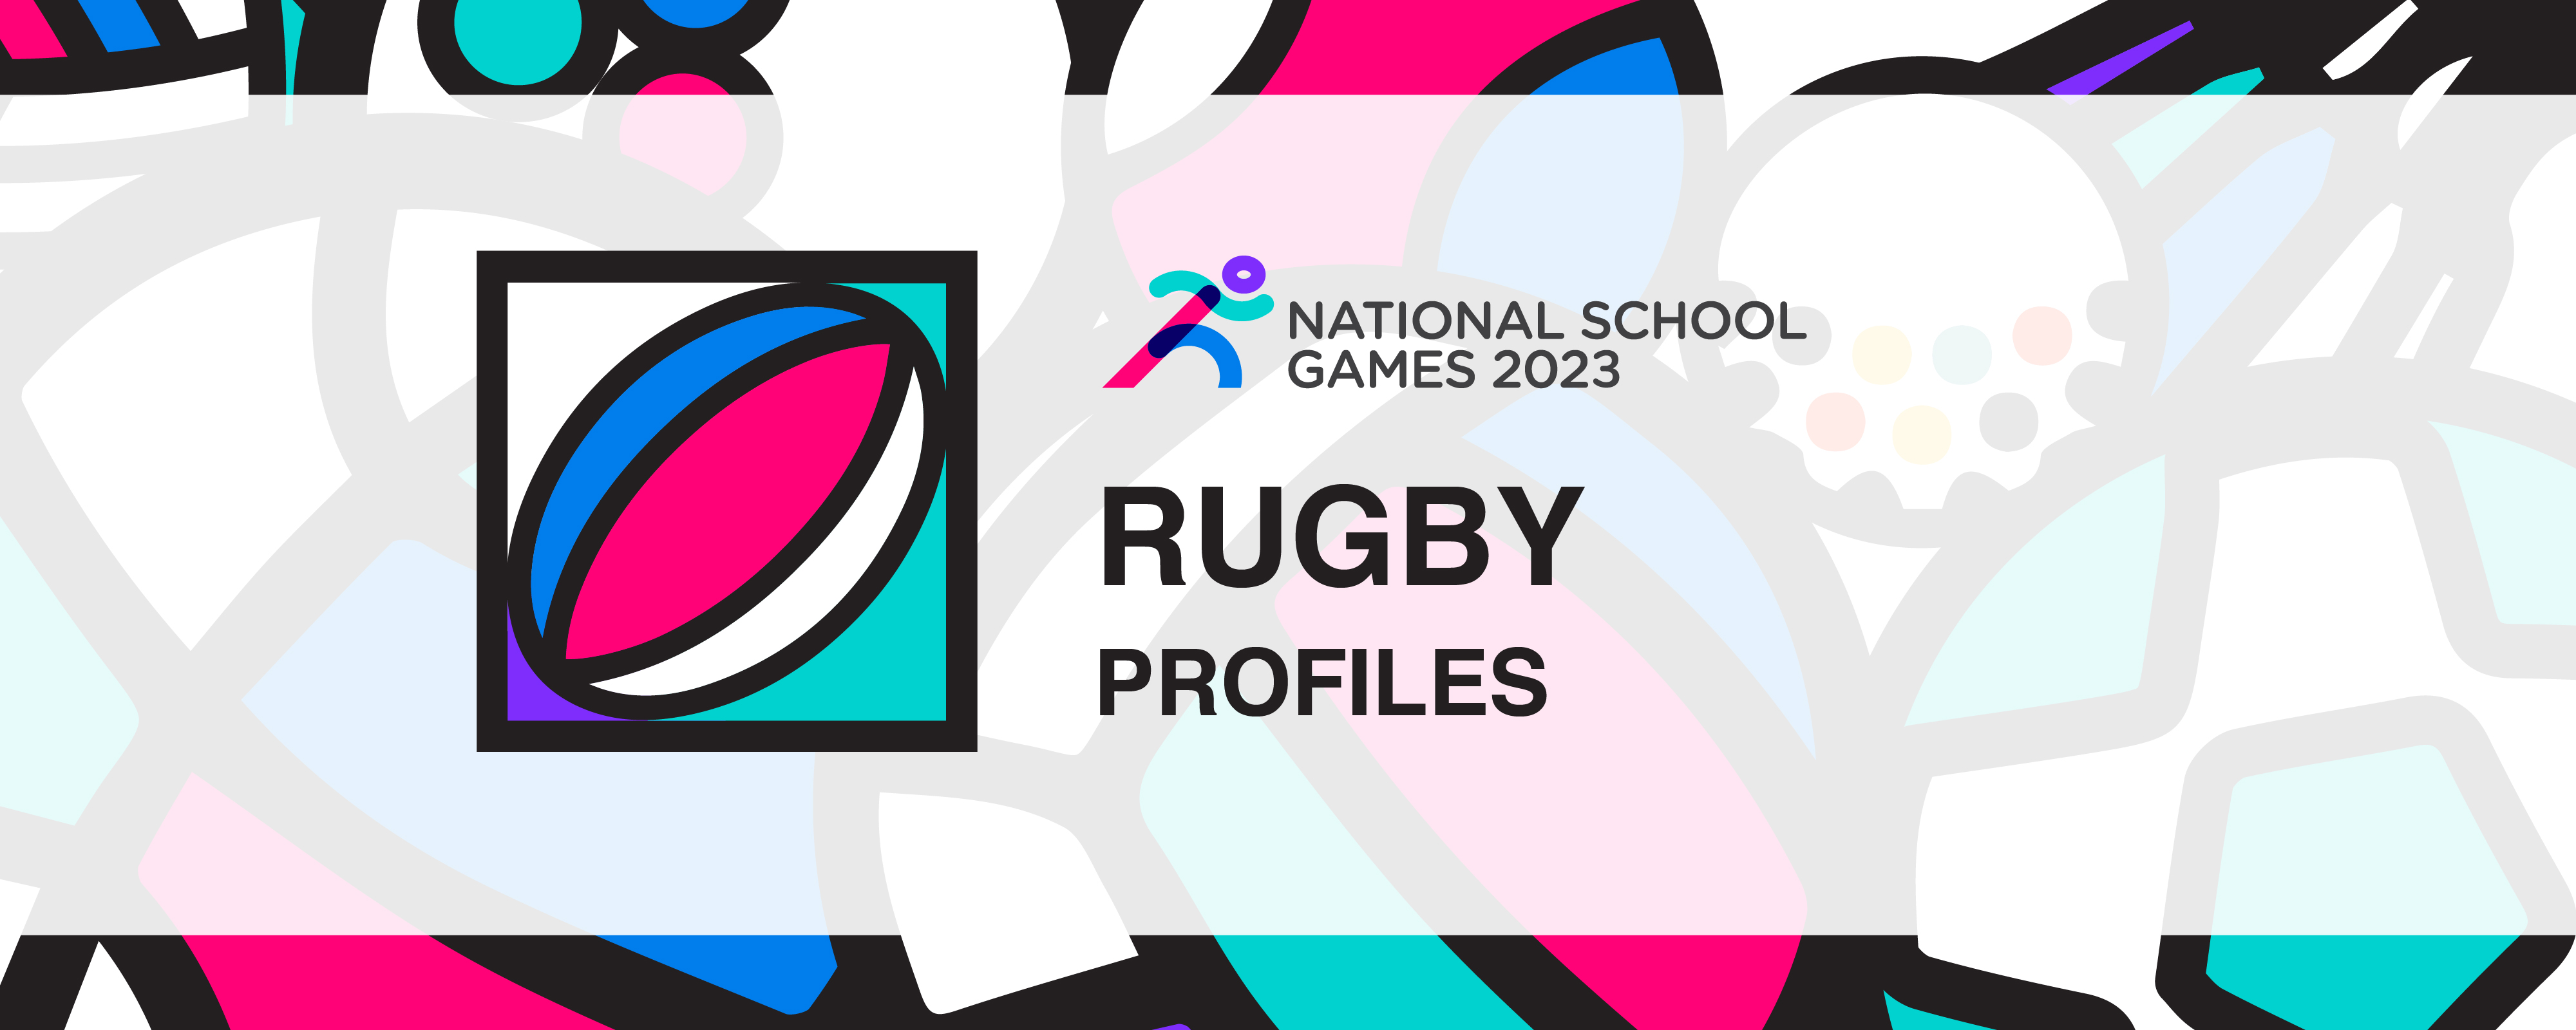 National School Games 2023 | Rugby | Profile